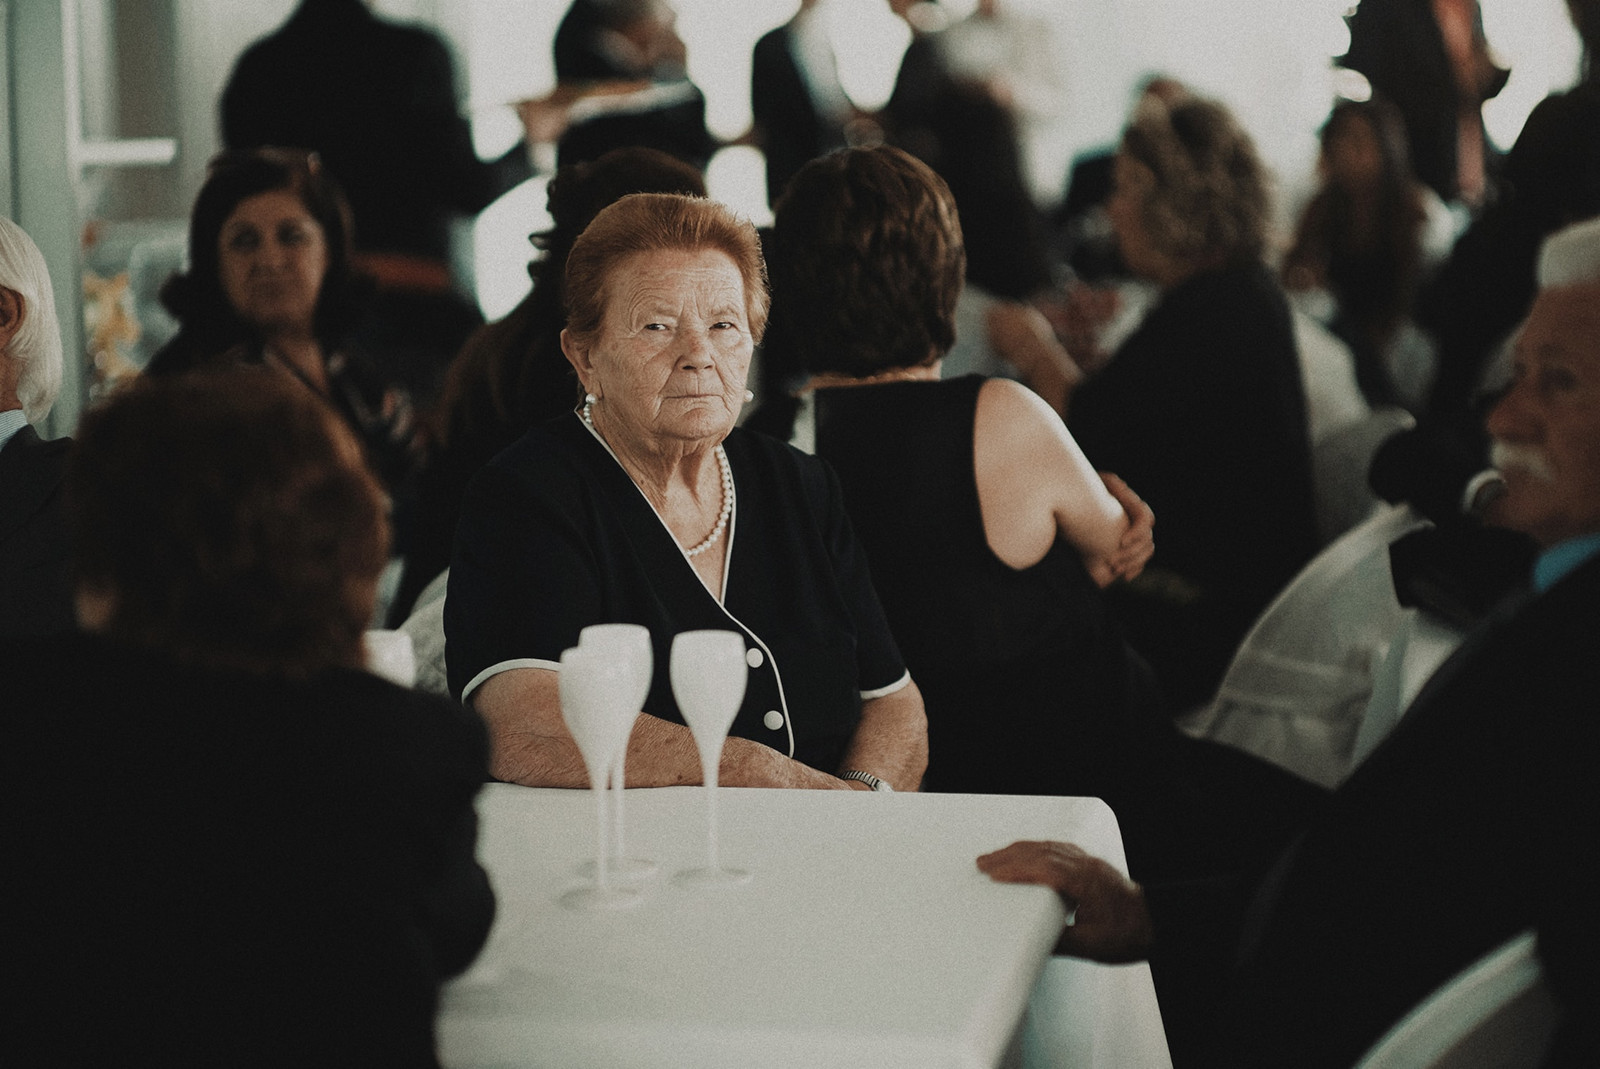 Older woman, seated, in black dress